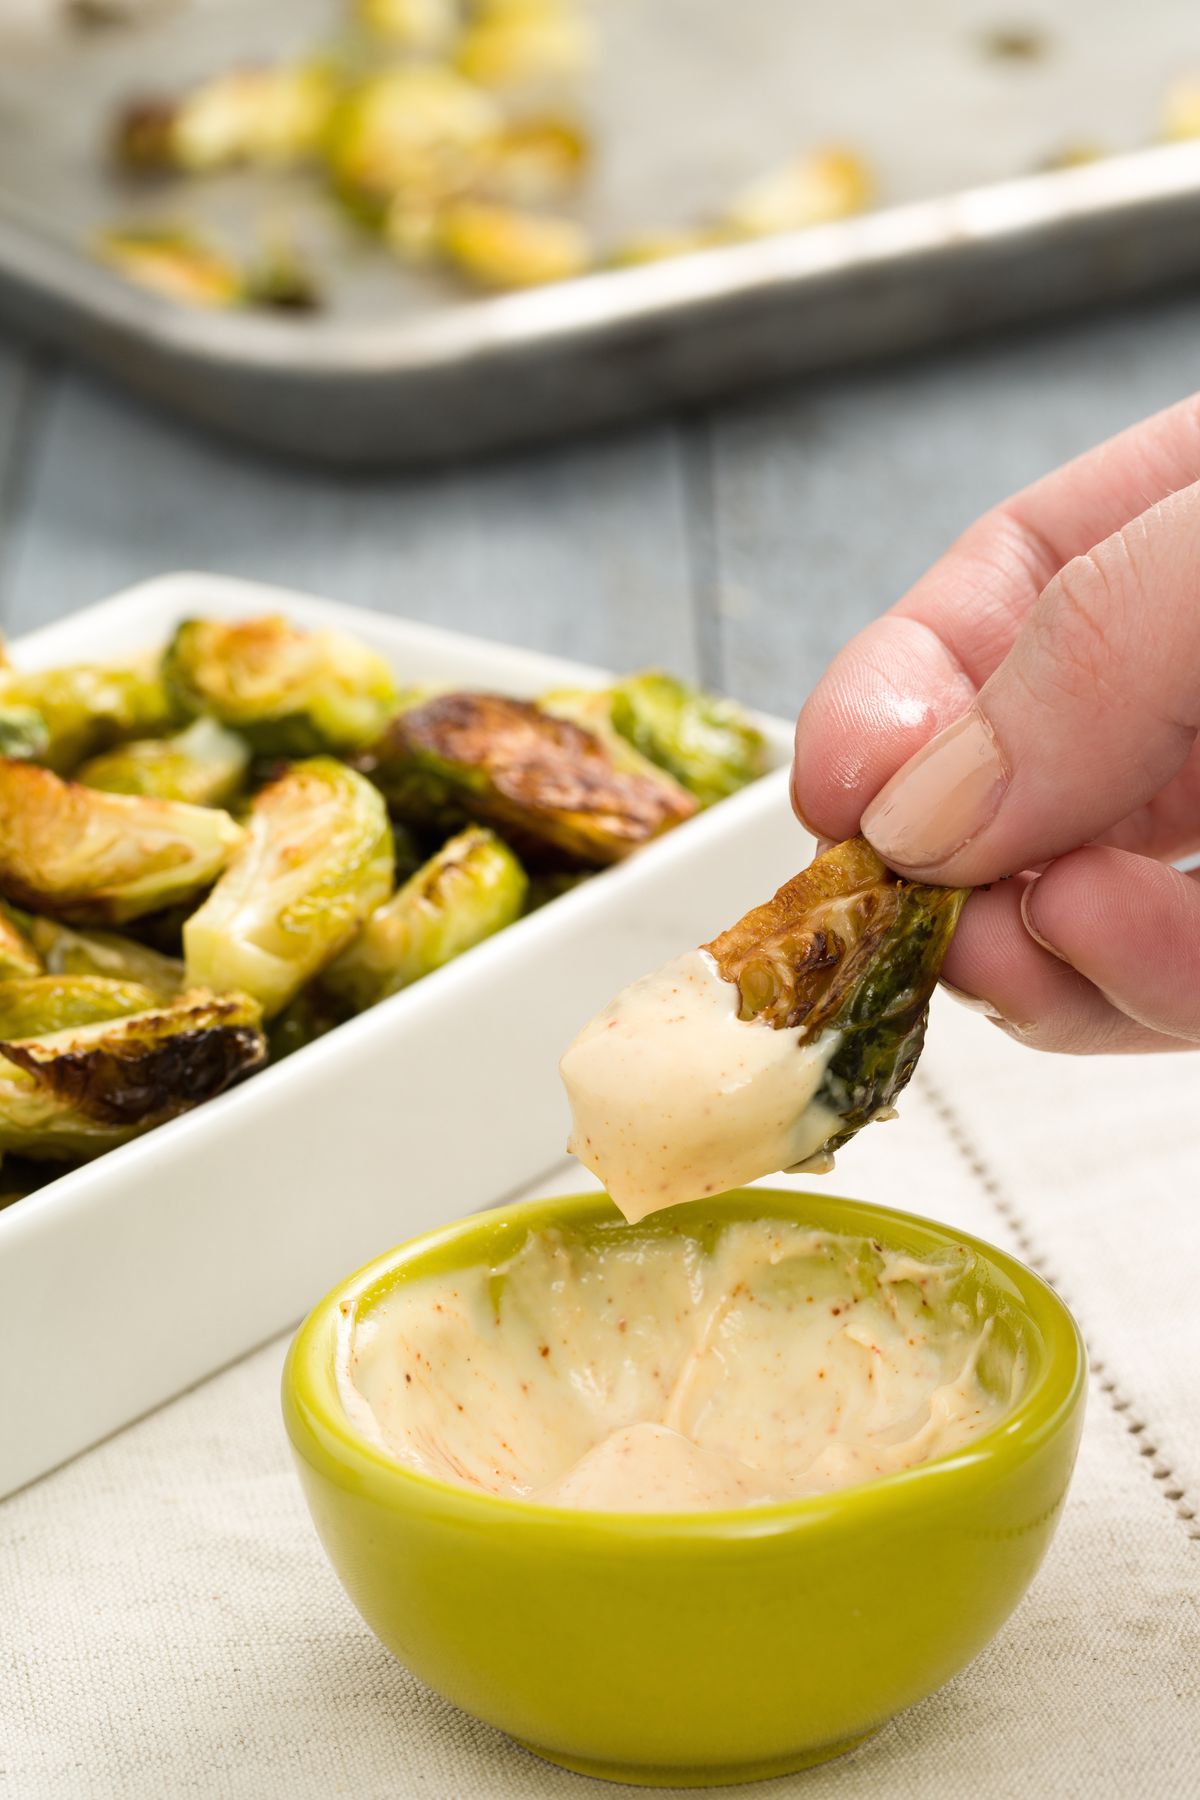 crispy brussels sprouts with spicy aioli